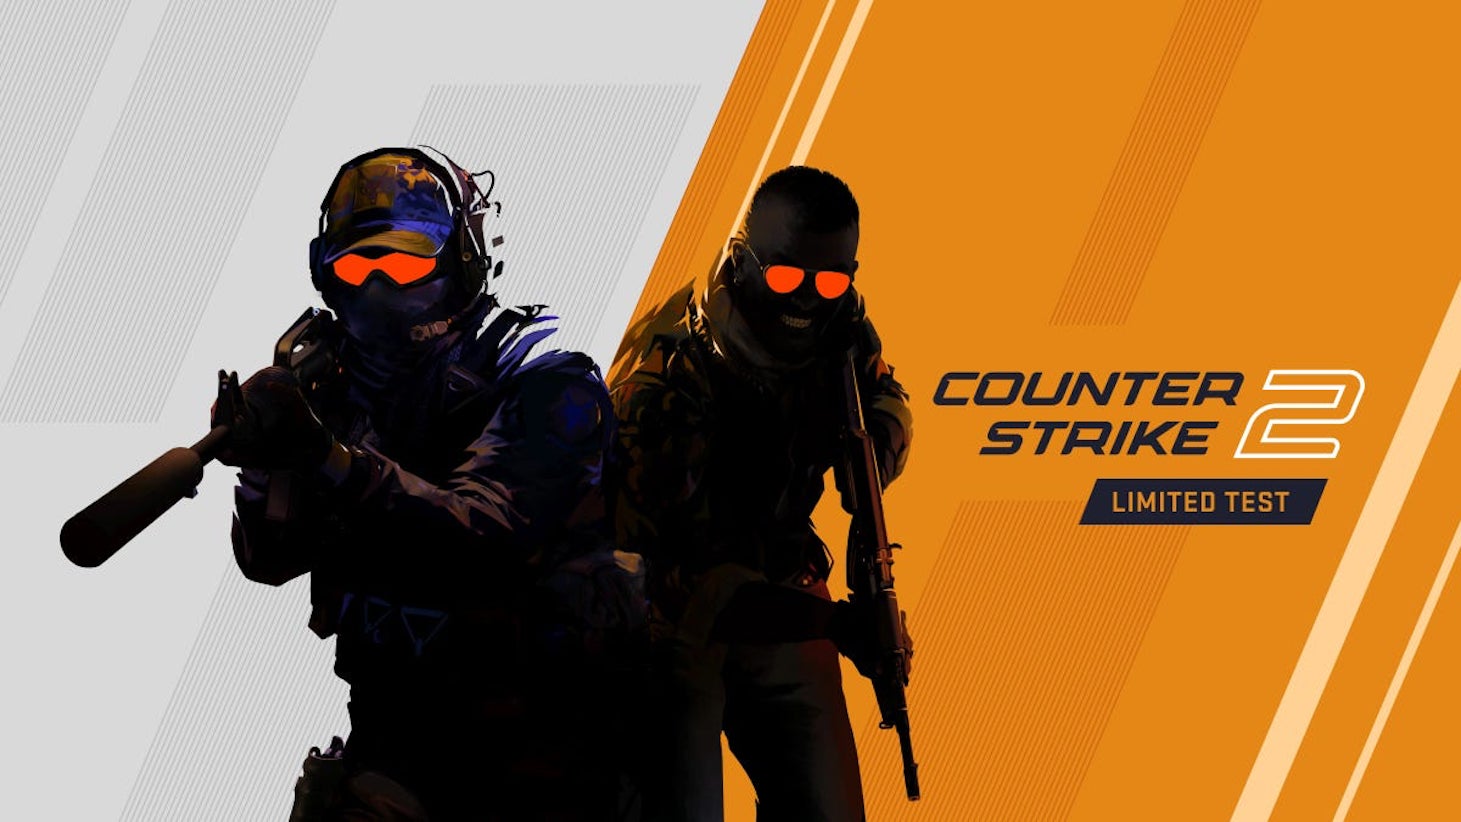 The silhouette of two soldiers wielding rifles standing next to the Counter Strike 2 limited test logo